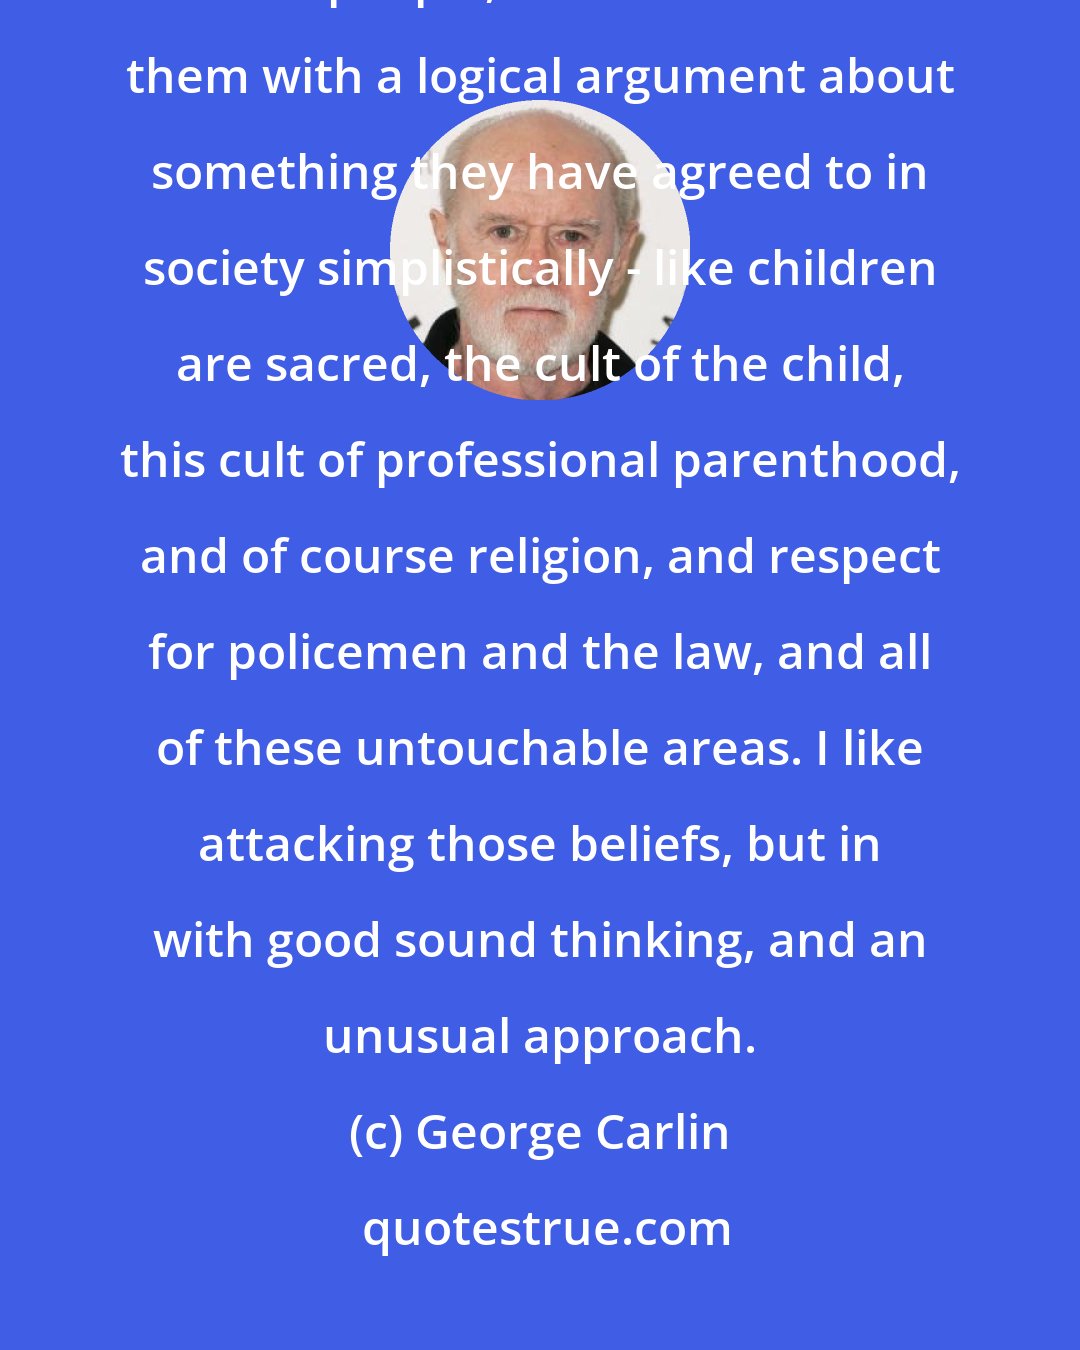 George Carlin: I like good ideas. I don't want just do something for it's own sake to bother people, but if I can bother them with a logical argument about something they have agreed to in society simplistically - like children are sacred, the cult of the child, this cult of professional parenthood, and of course religion, and respect for policemen and the law, and all of these untouchable areas. I like attacking those beliefs, but in with good sound thinking, and an unusual approach.